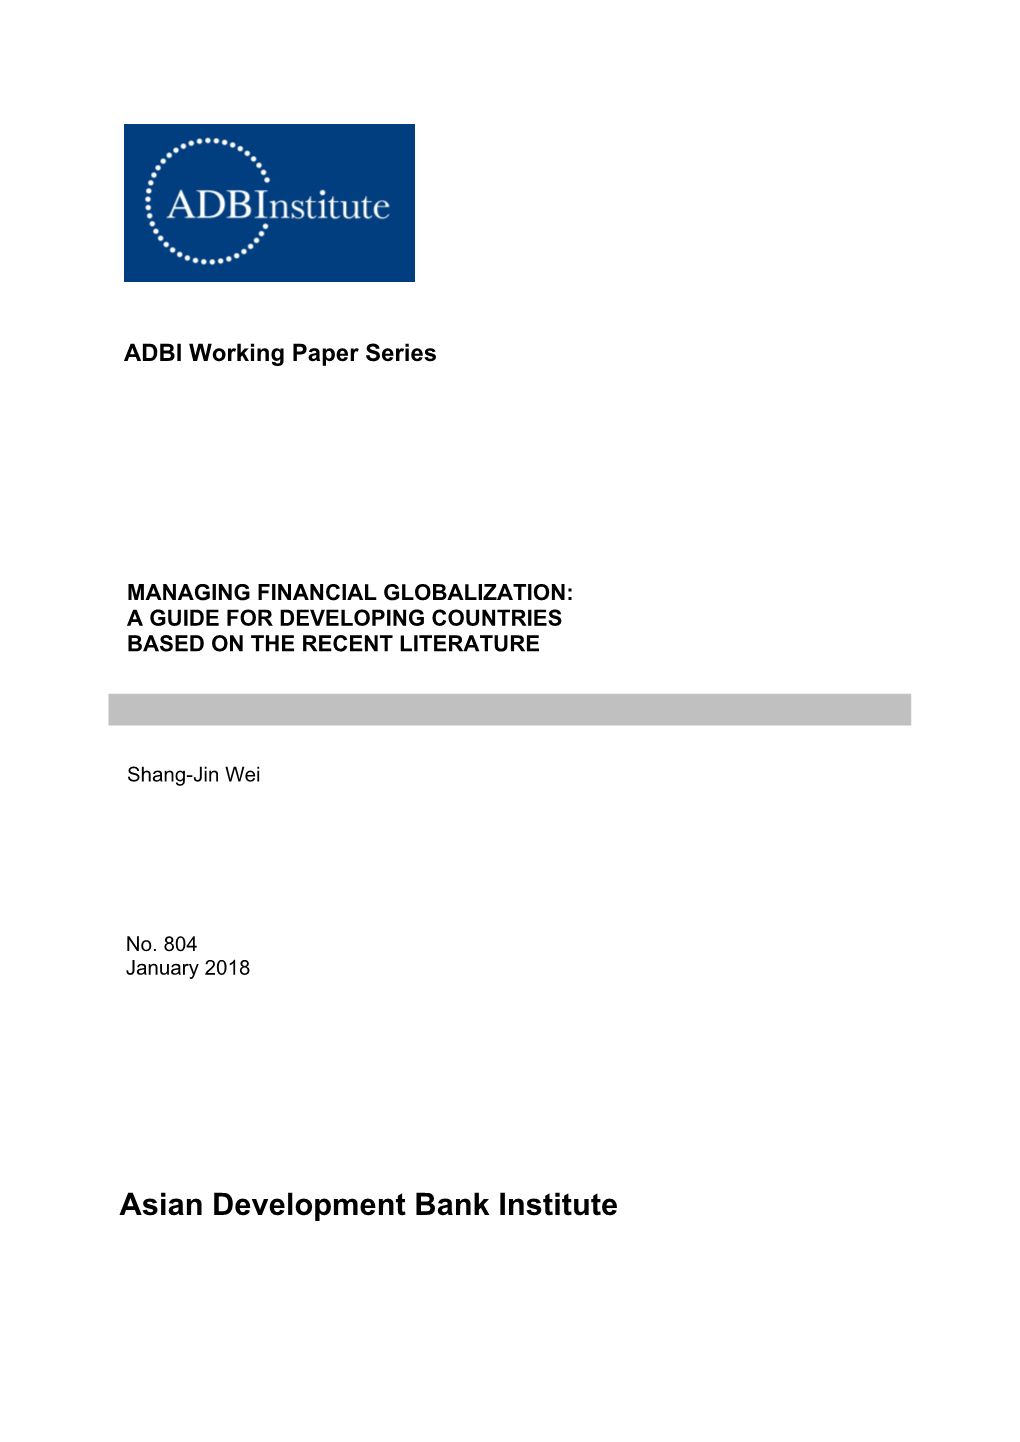 Managing Financial Globalization: a Guide for Developing Countries Based on the Recent Literature